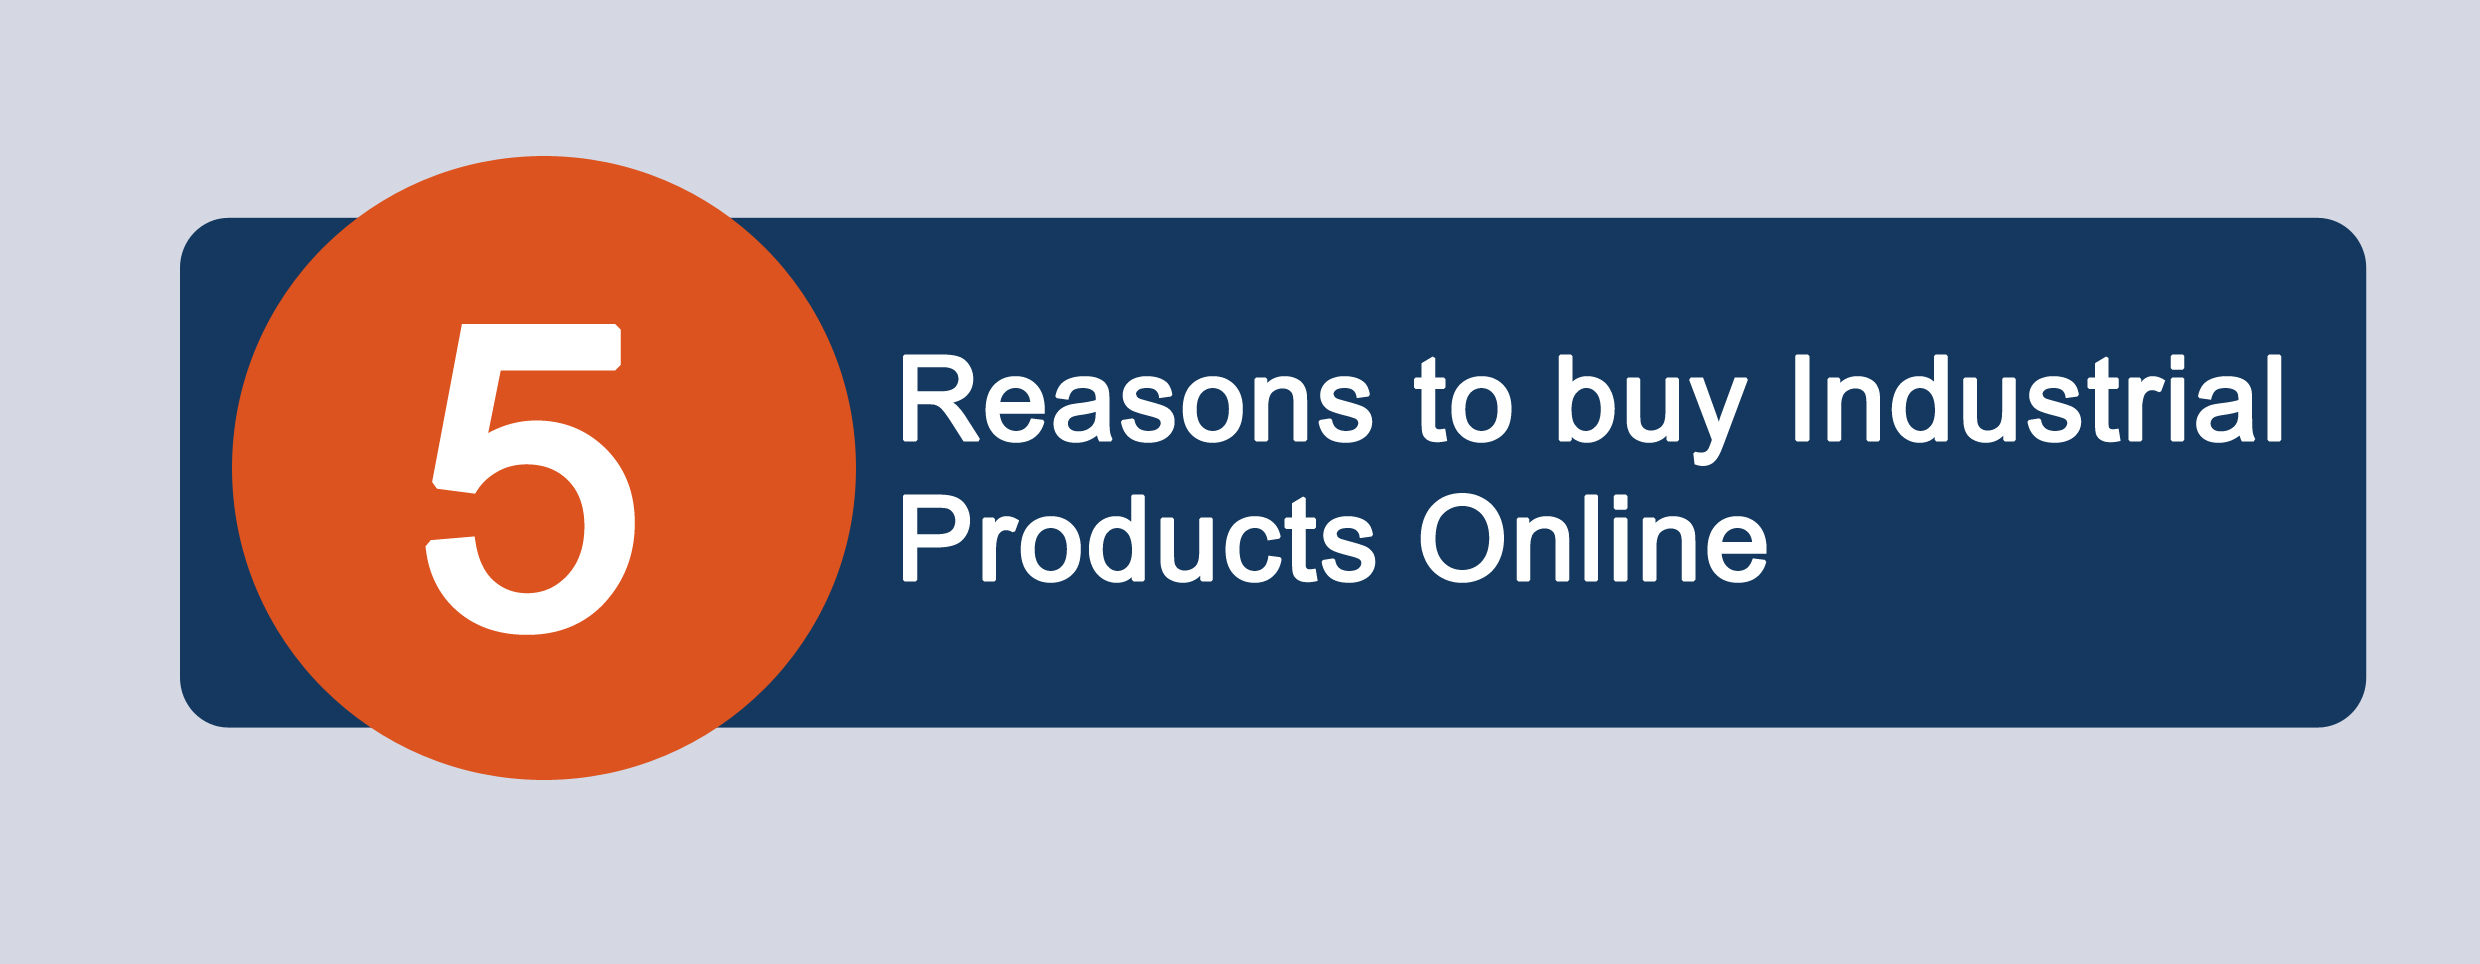 Reasons to buy Industrial Products Online